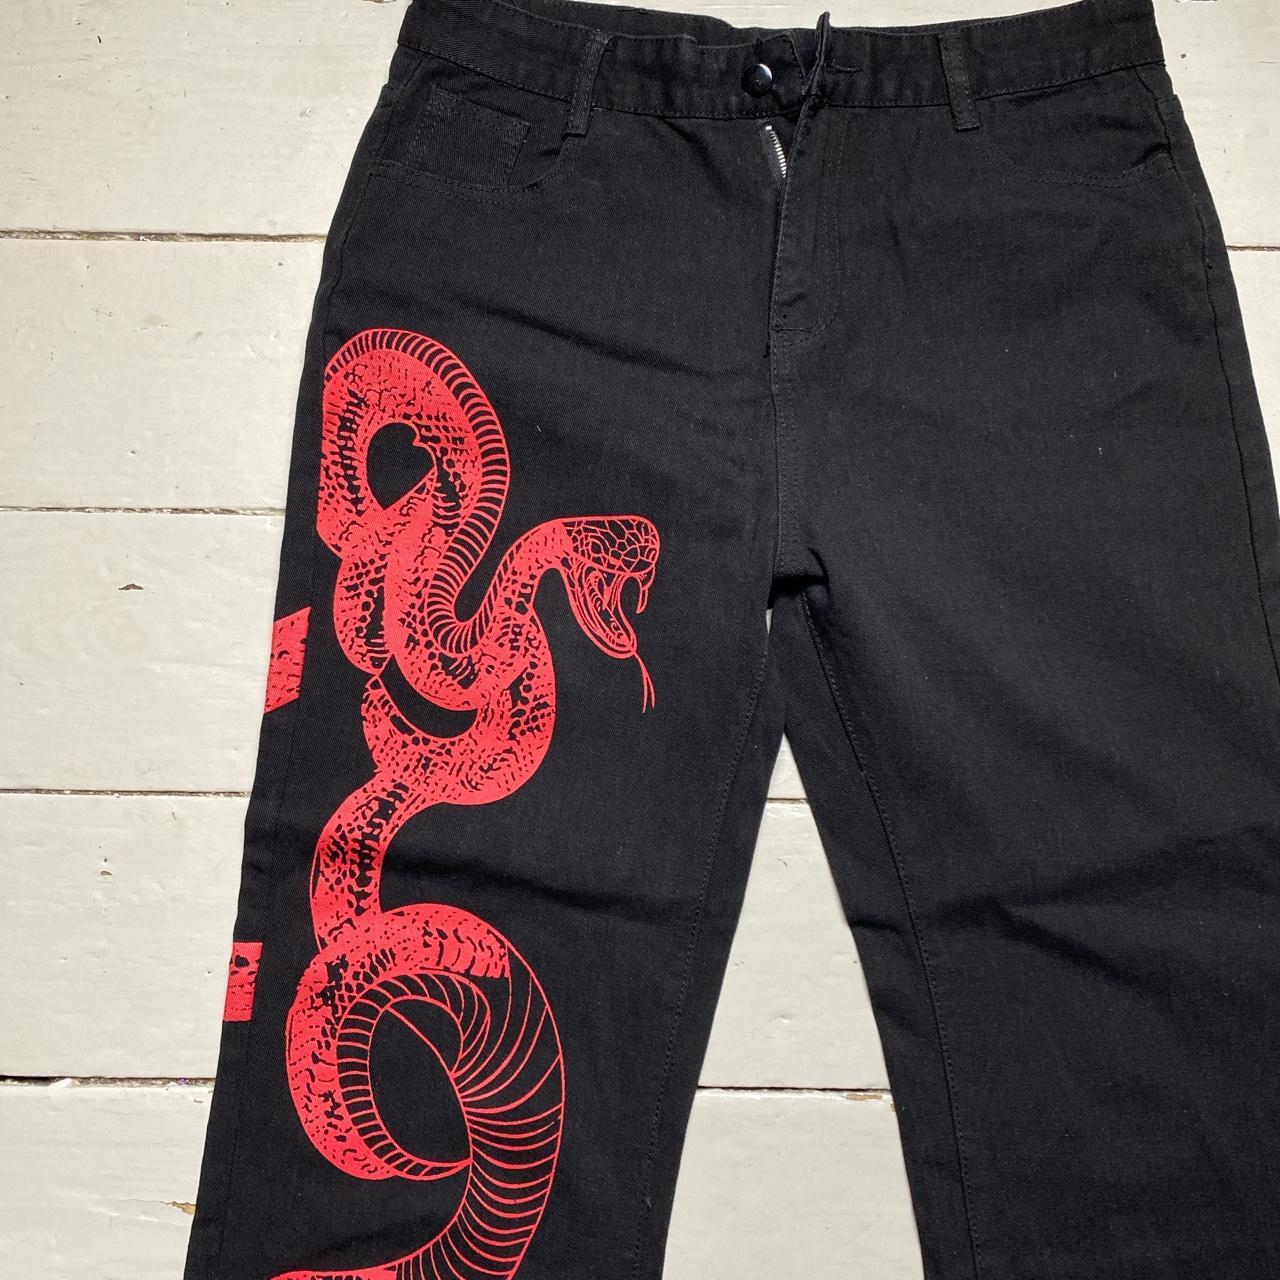 Snake Print Black and Red Jeans